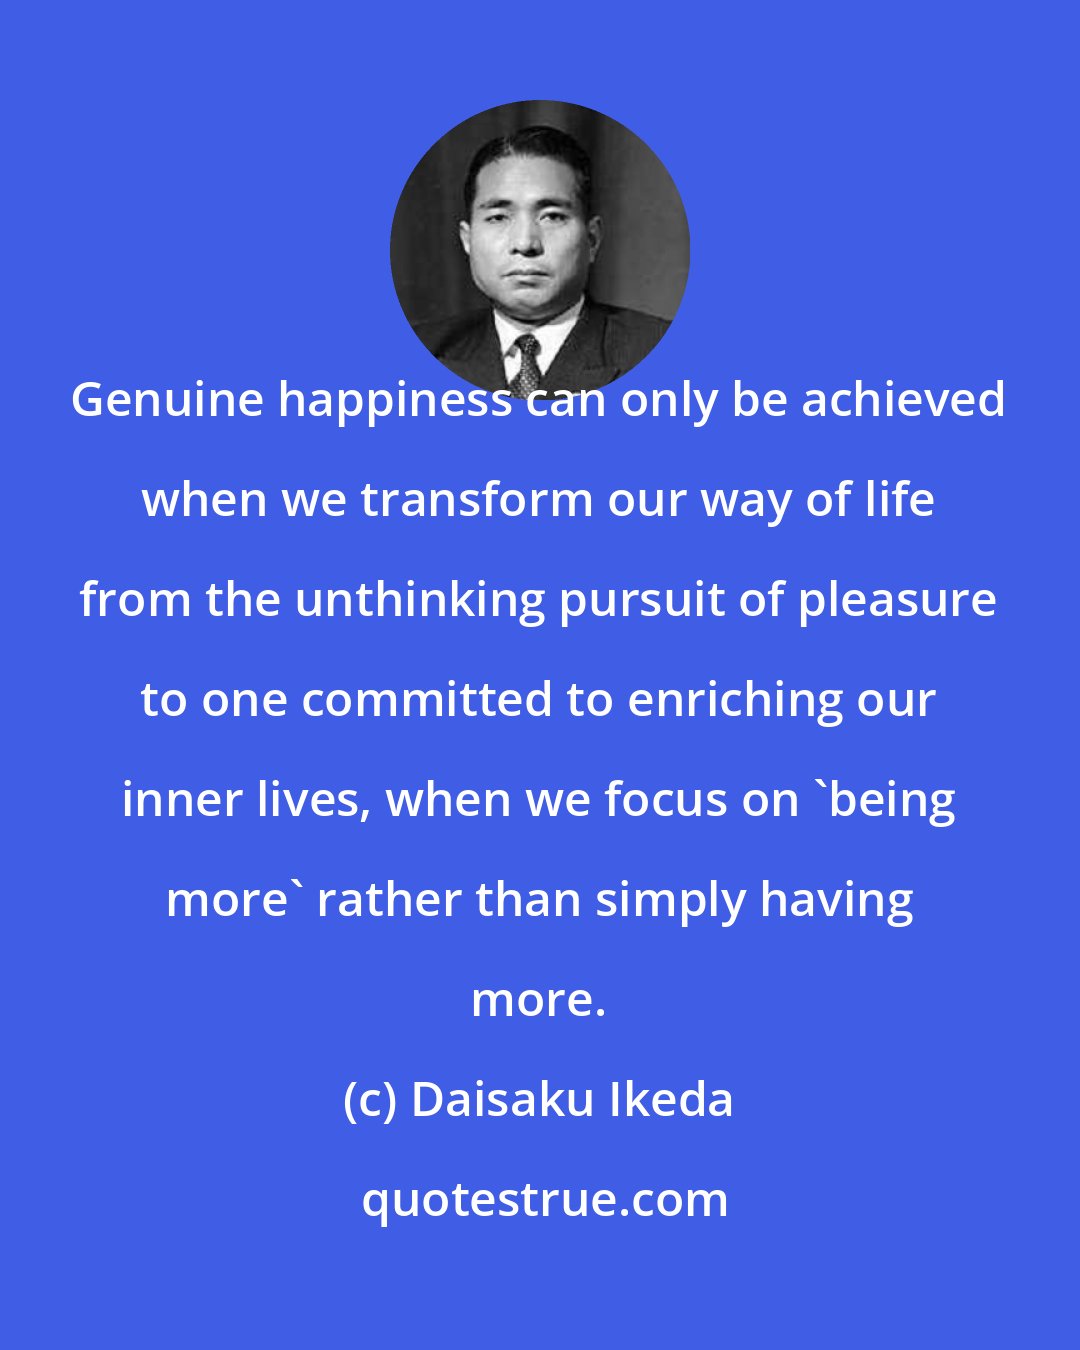 Daisaku Ikeda: Genuine happiness can only be achieved when we transform our way of life from the unthinking pursuit of pleasure to one committed to enriching our inner lives, when we focus on 'being more' rather than simply having more.